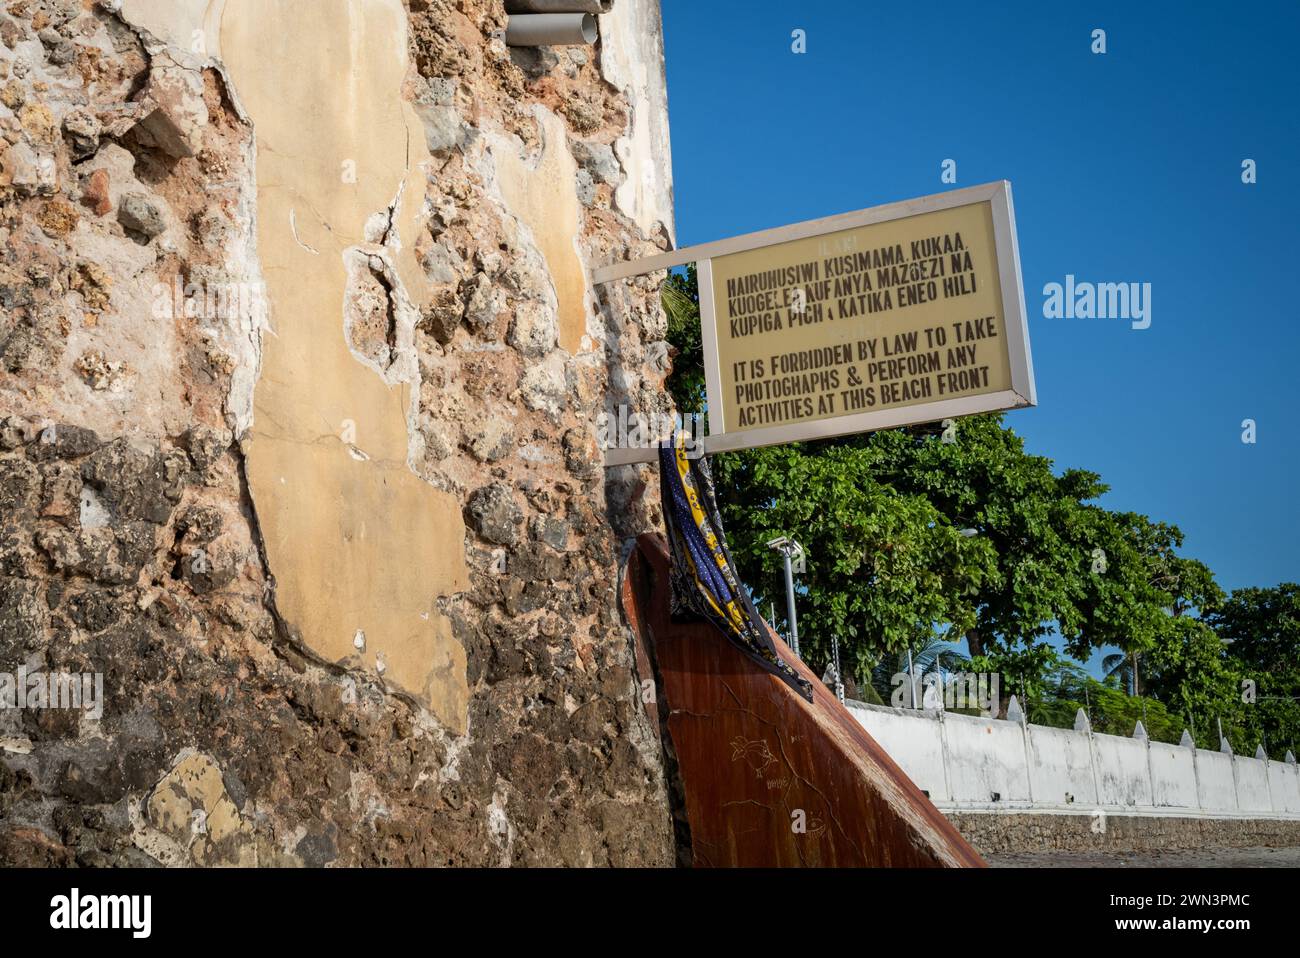 A sign on the beach banning photography and activities in Stone Town, Zanzibar, Tanzania Stock Photo